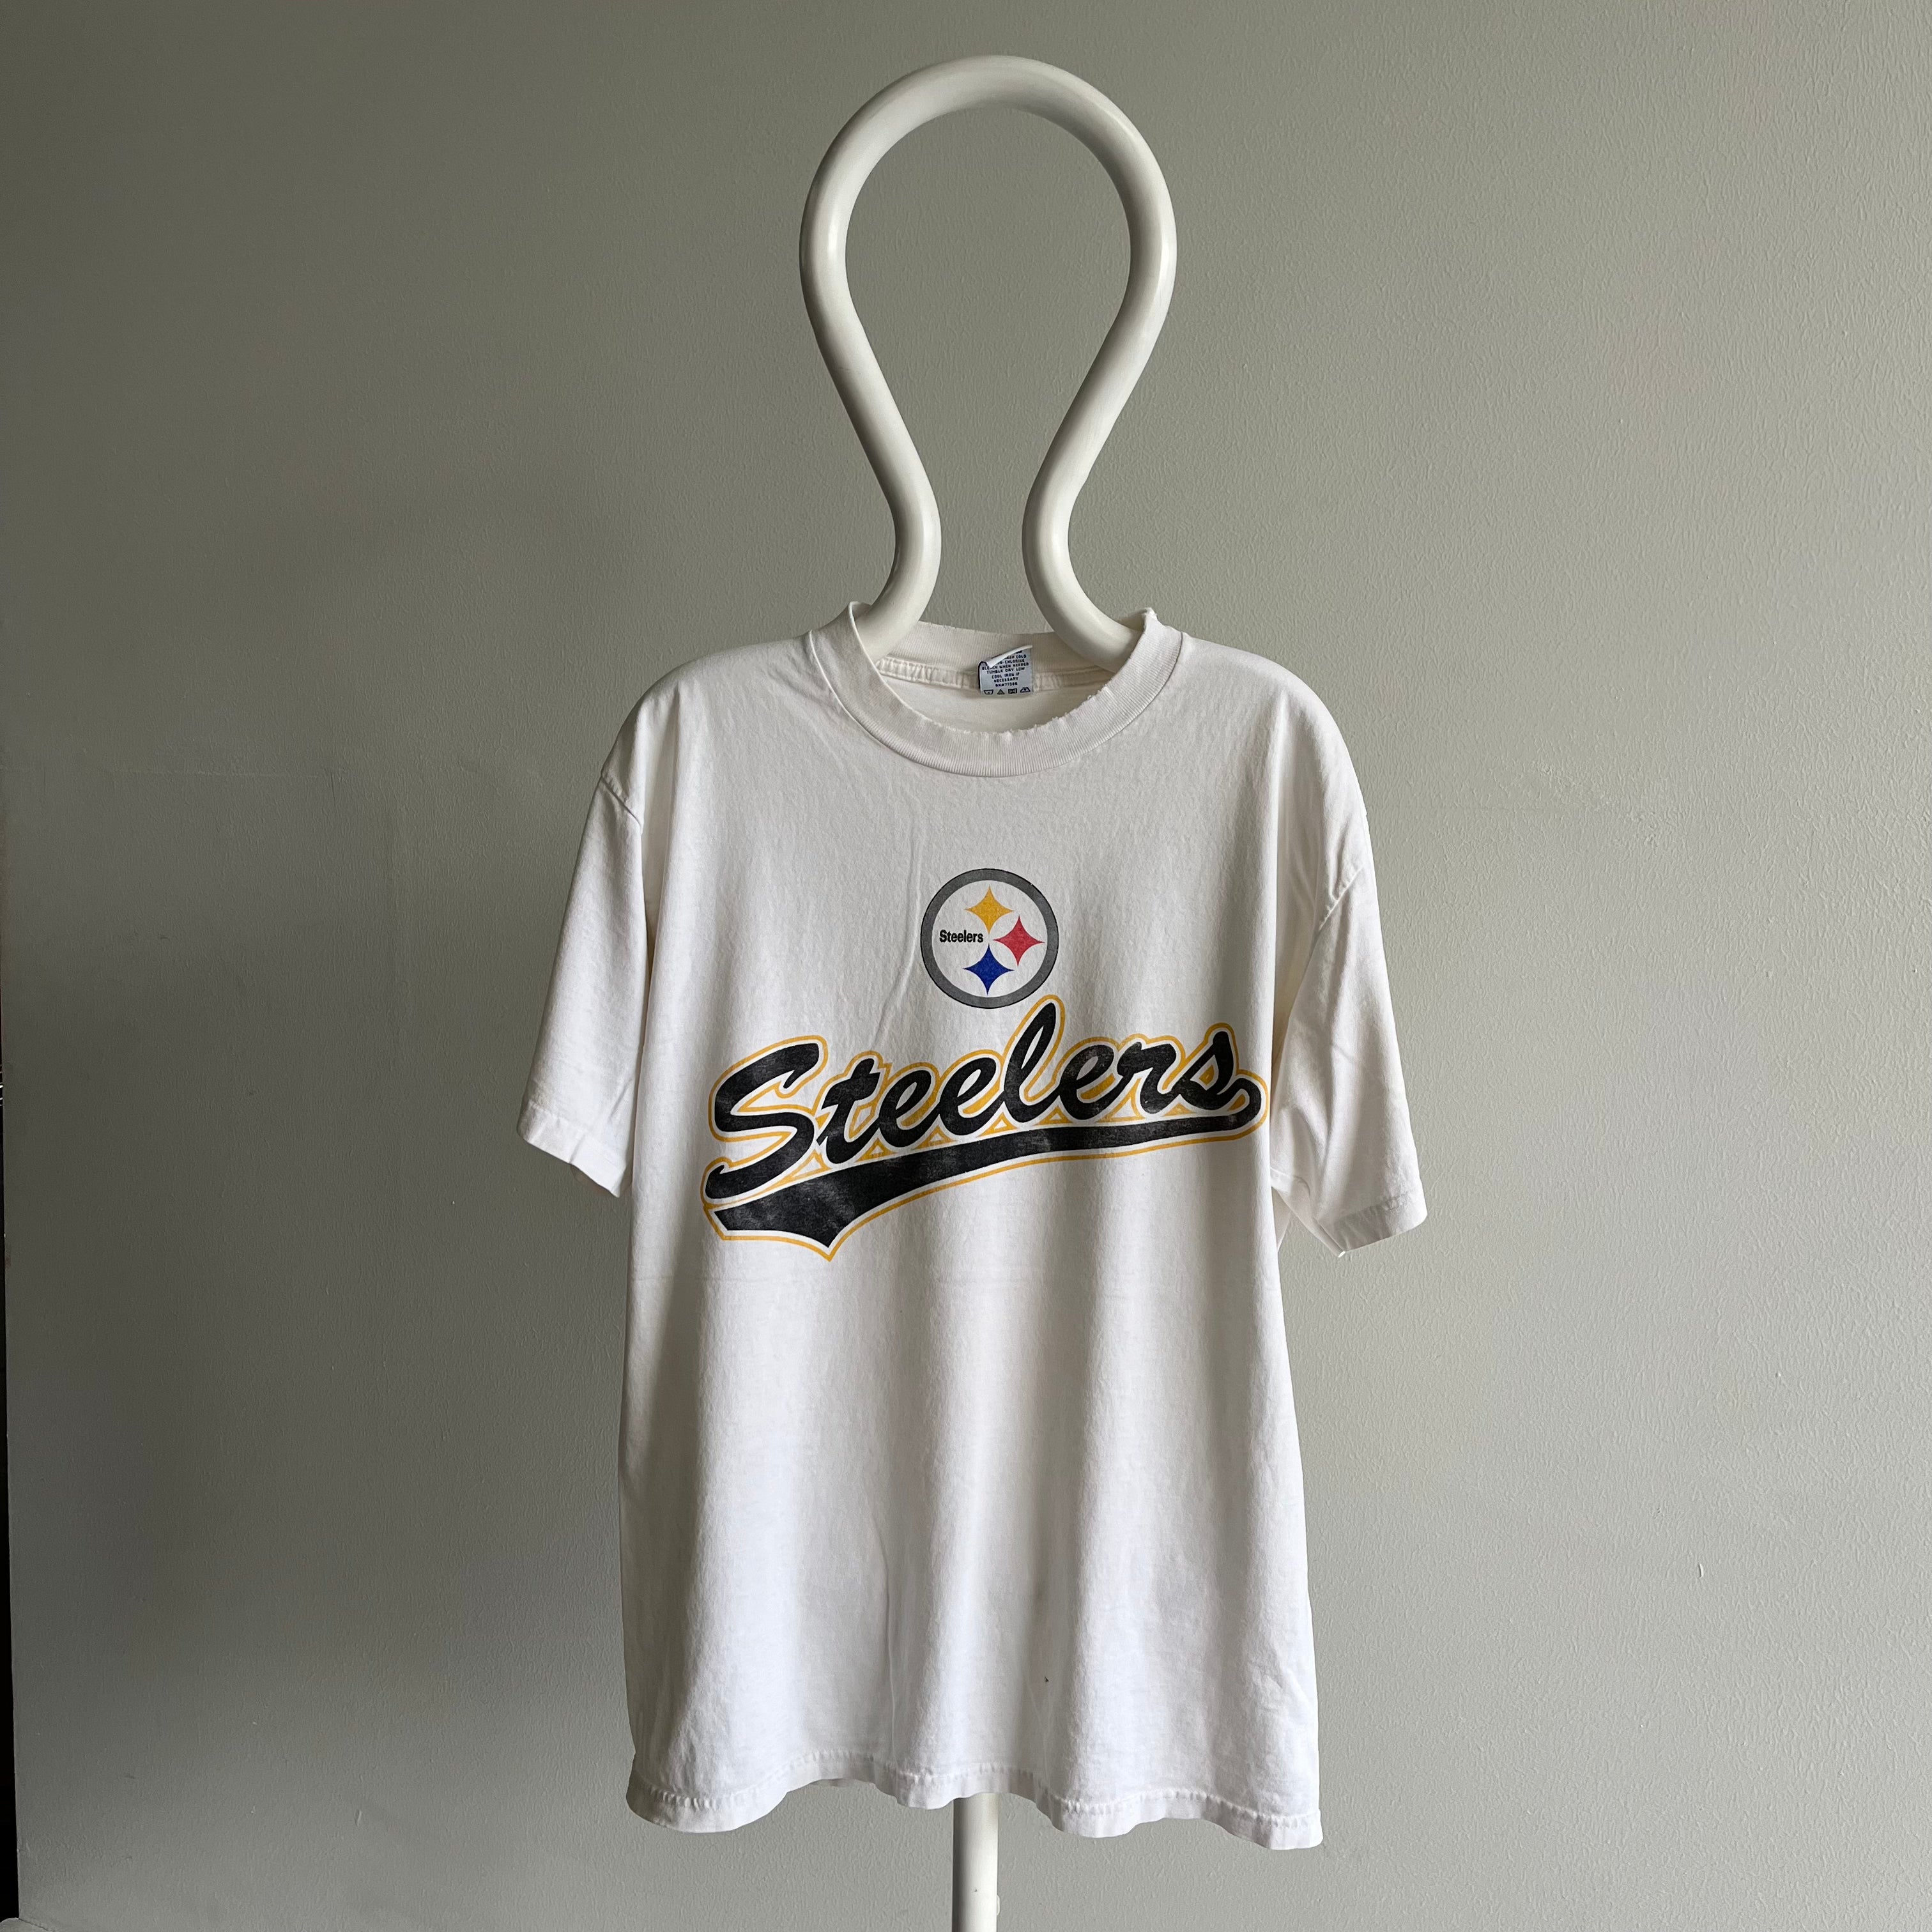 1990s Perfectly Tattered and Worn Steelers T-Shirt